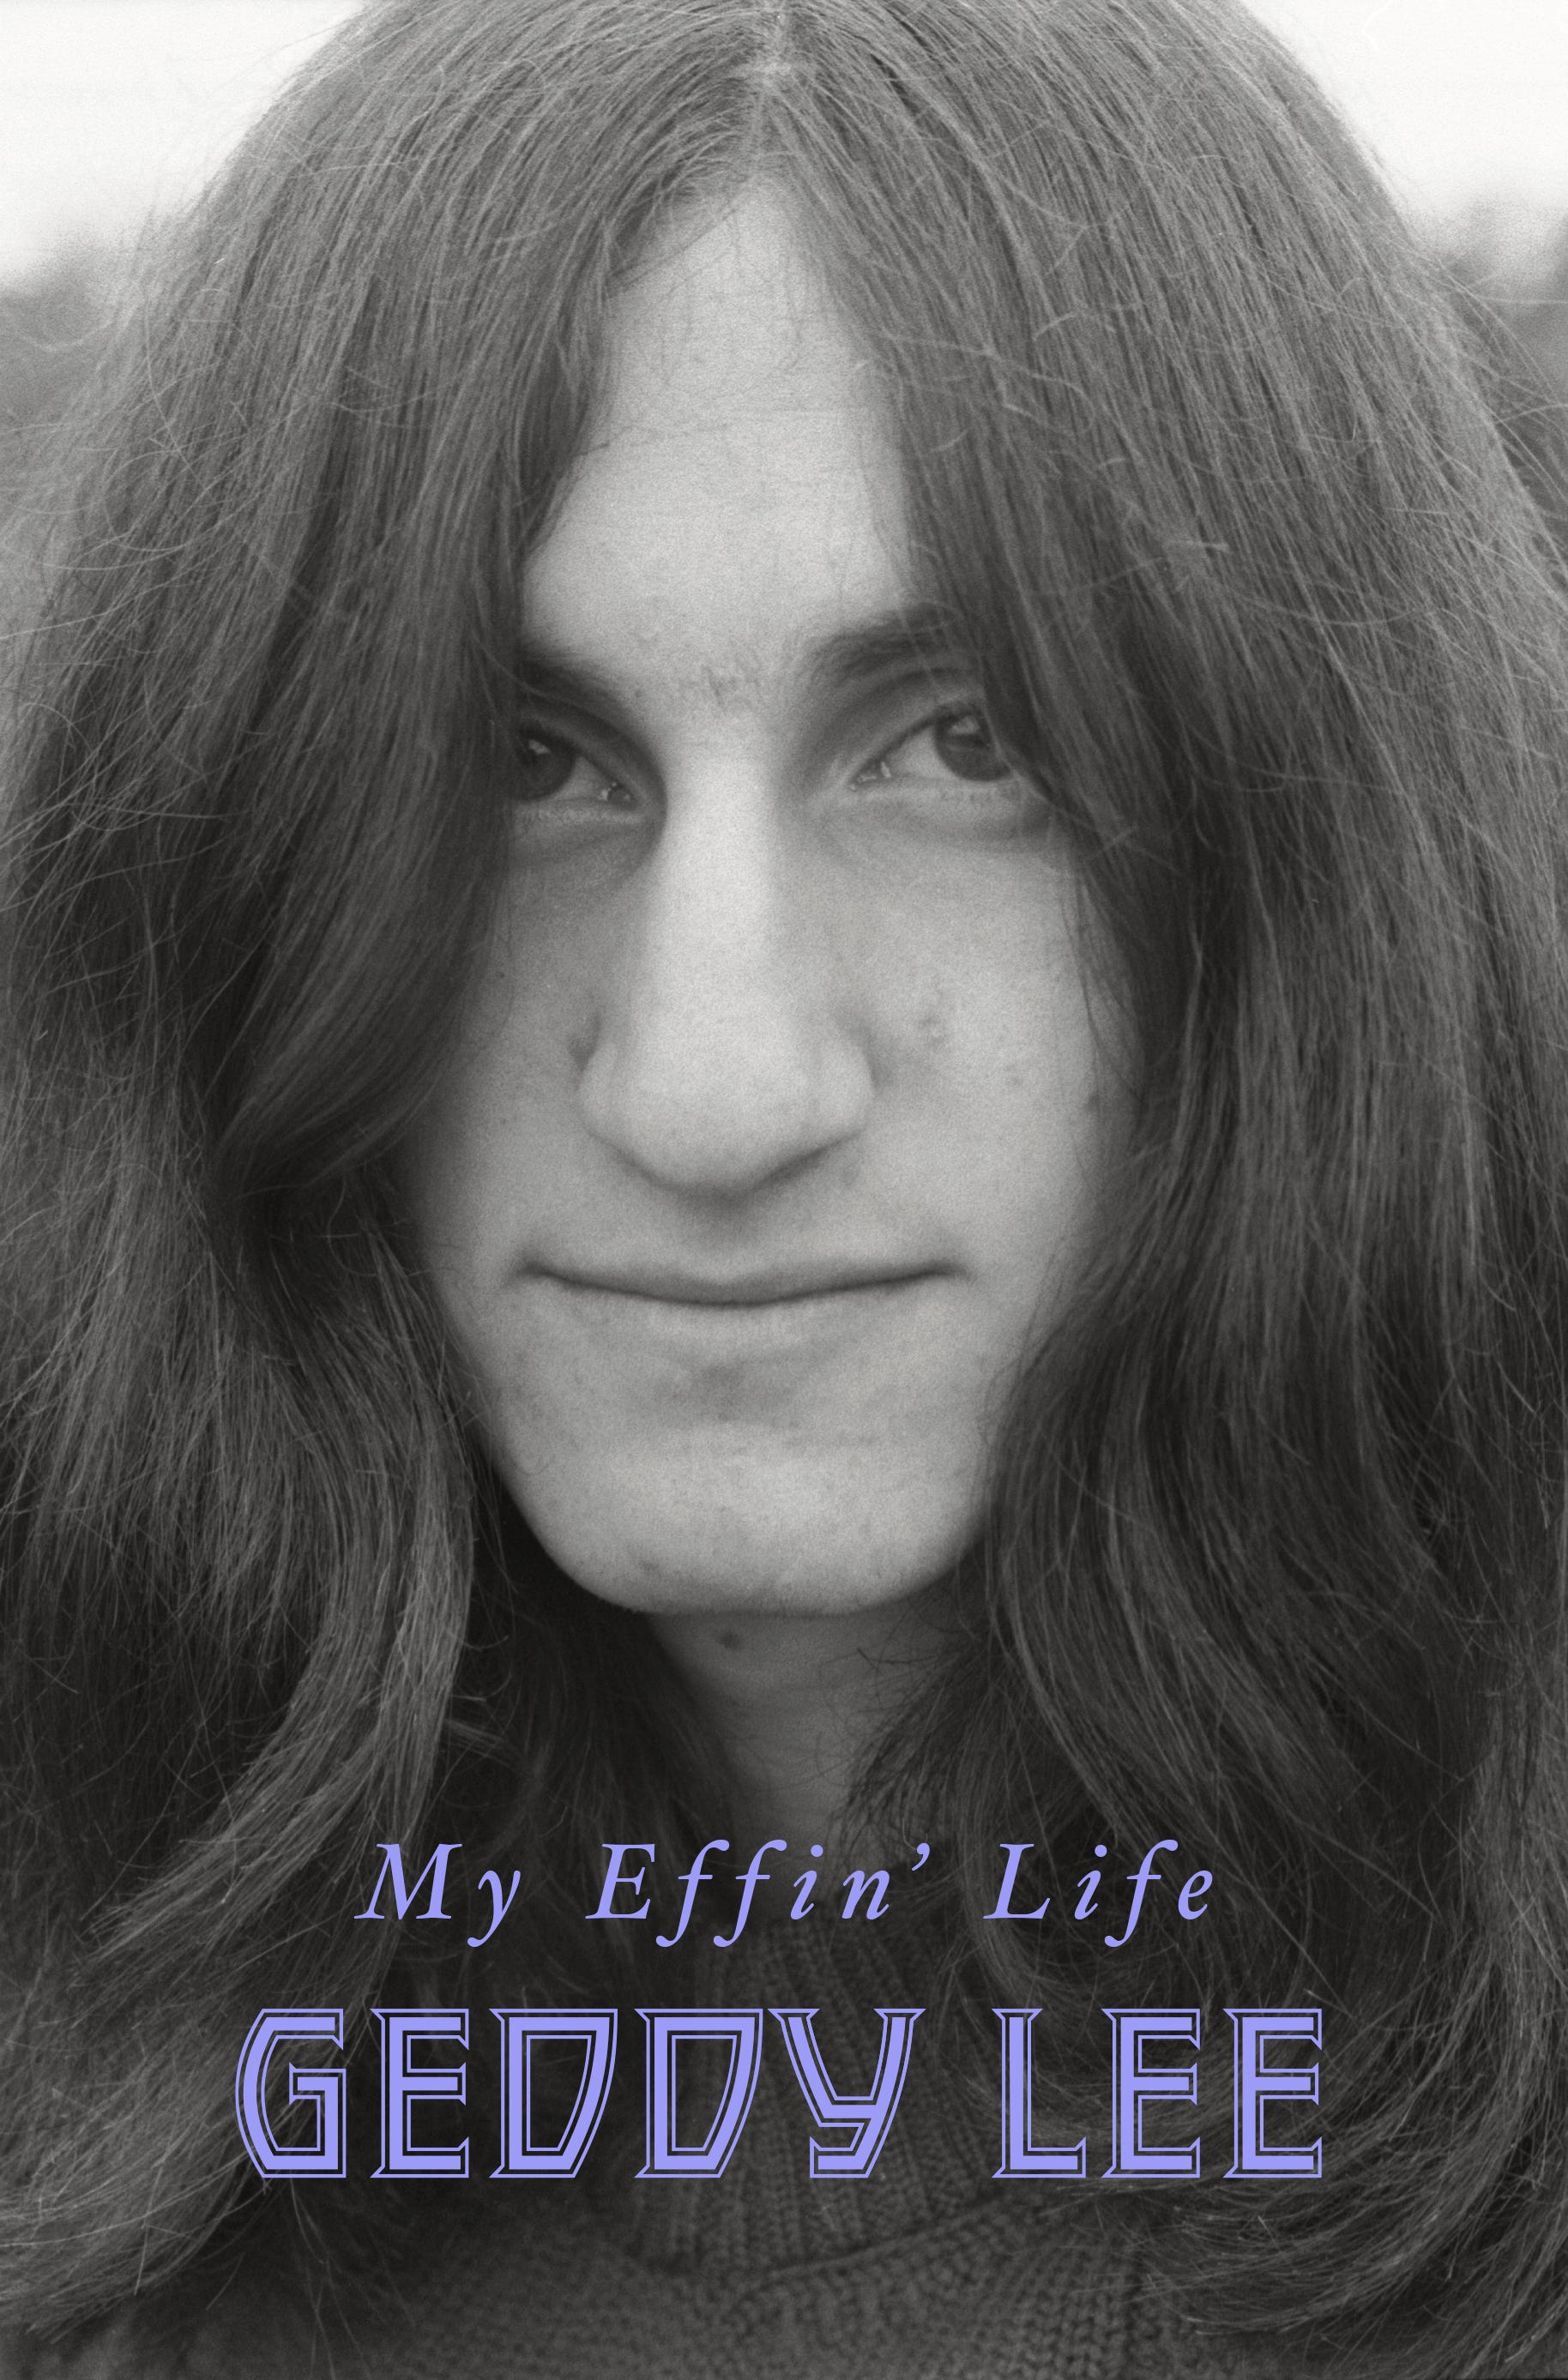 This cover image released by Harper shows "My Effin' Life" by Geddy Lee.